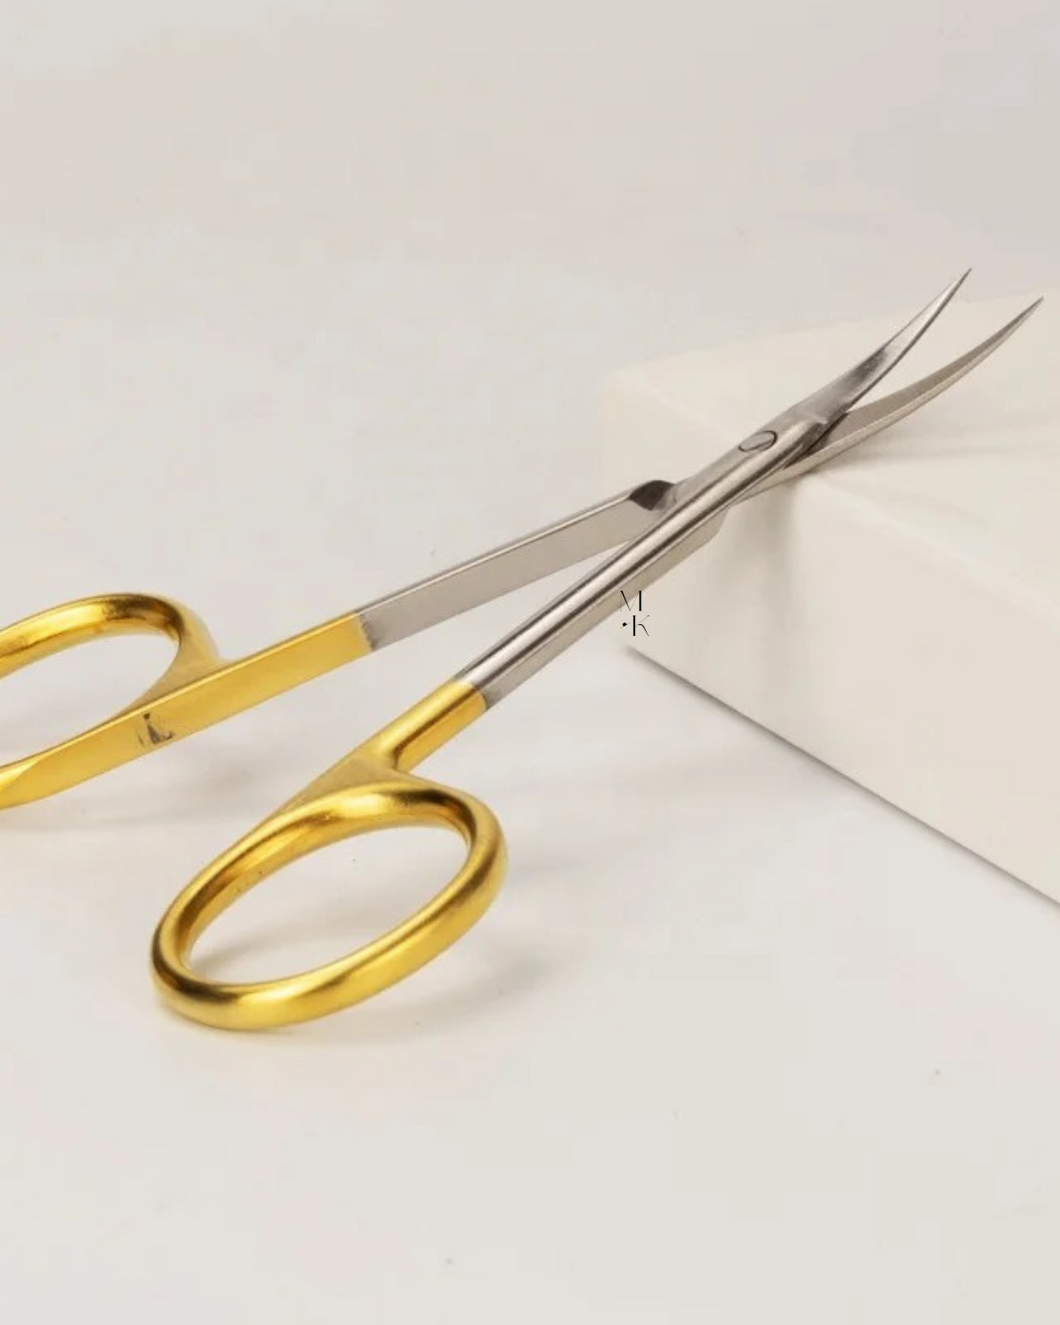 Society Curved Scissors